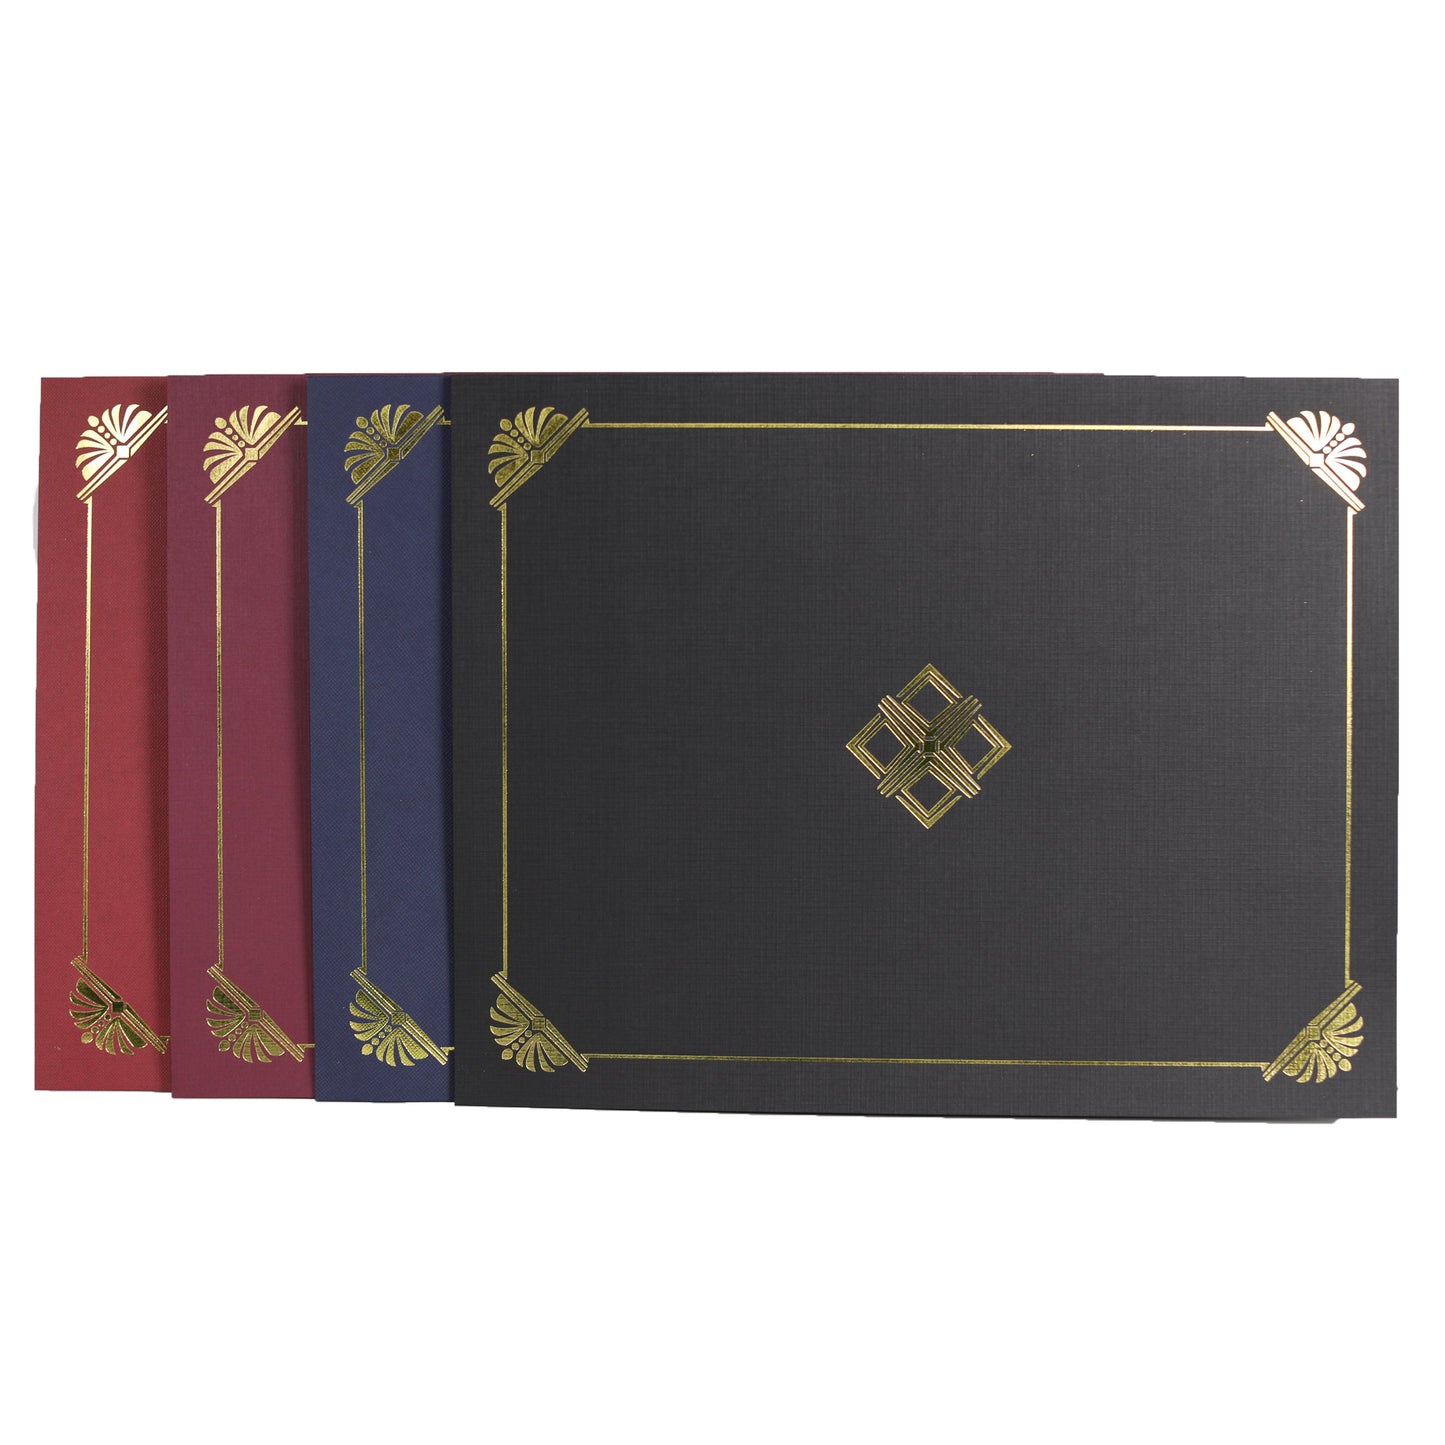 St. James® Certificate Holders/Document Covers/Diploma Holders, Navy Blue, Gold Foil, Linen Finish, Pack of 5, 83809